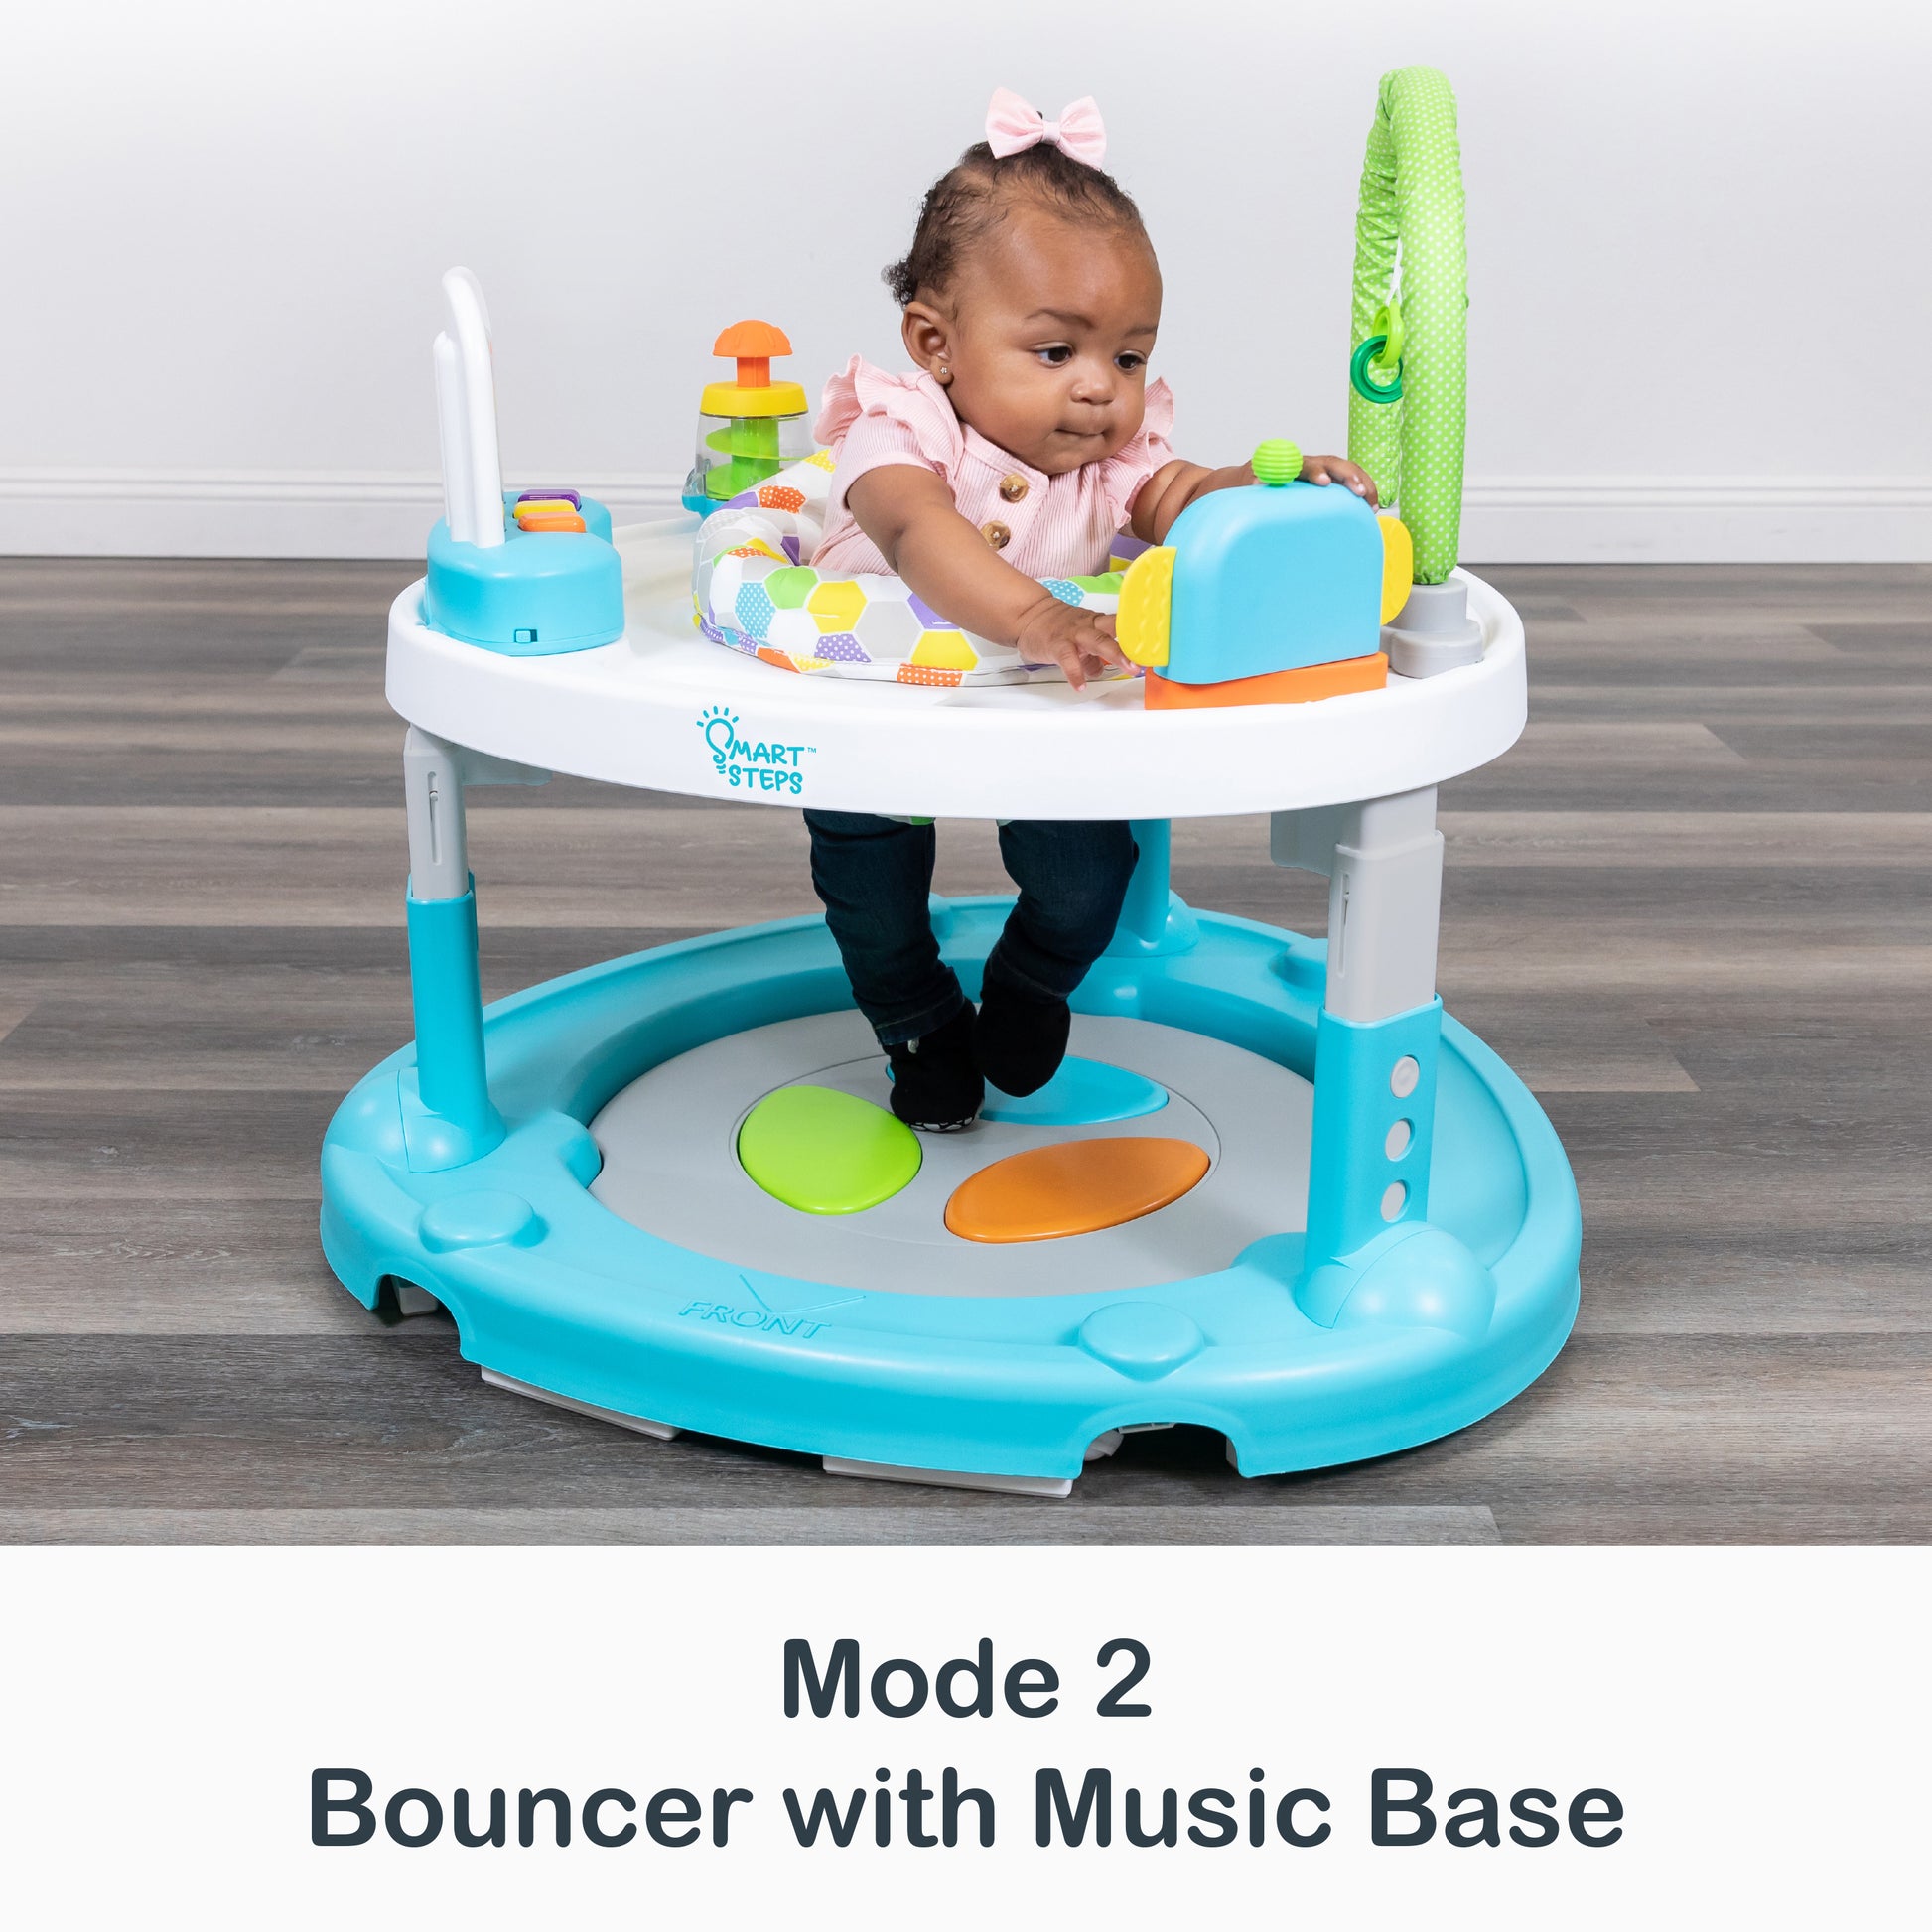 Mode 2 Bouncer with Music Base of the Smart Steps Bounce N’ Dance 4-in-1 Activity Center Walker